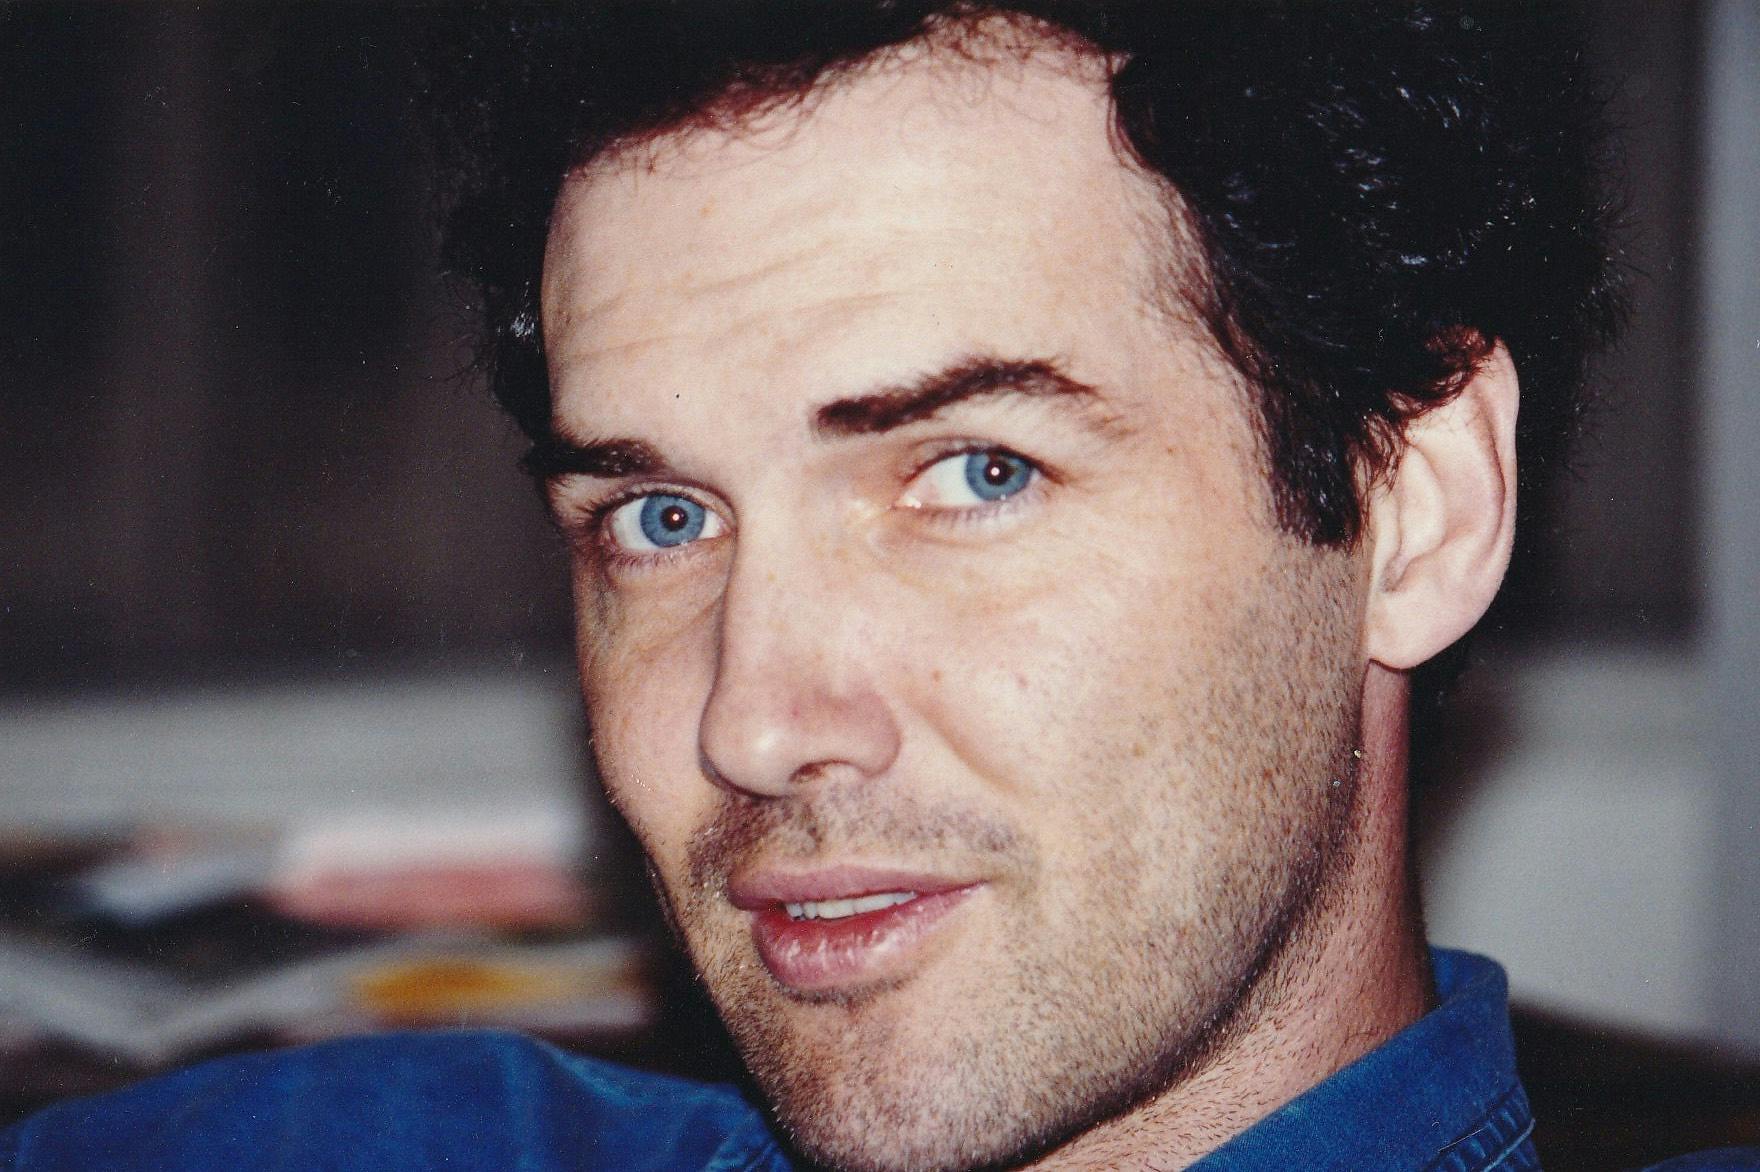 Norm Macdonald wears a blue shirt that matches his blue eyes. 